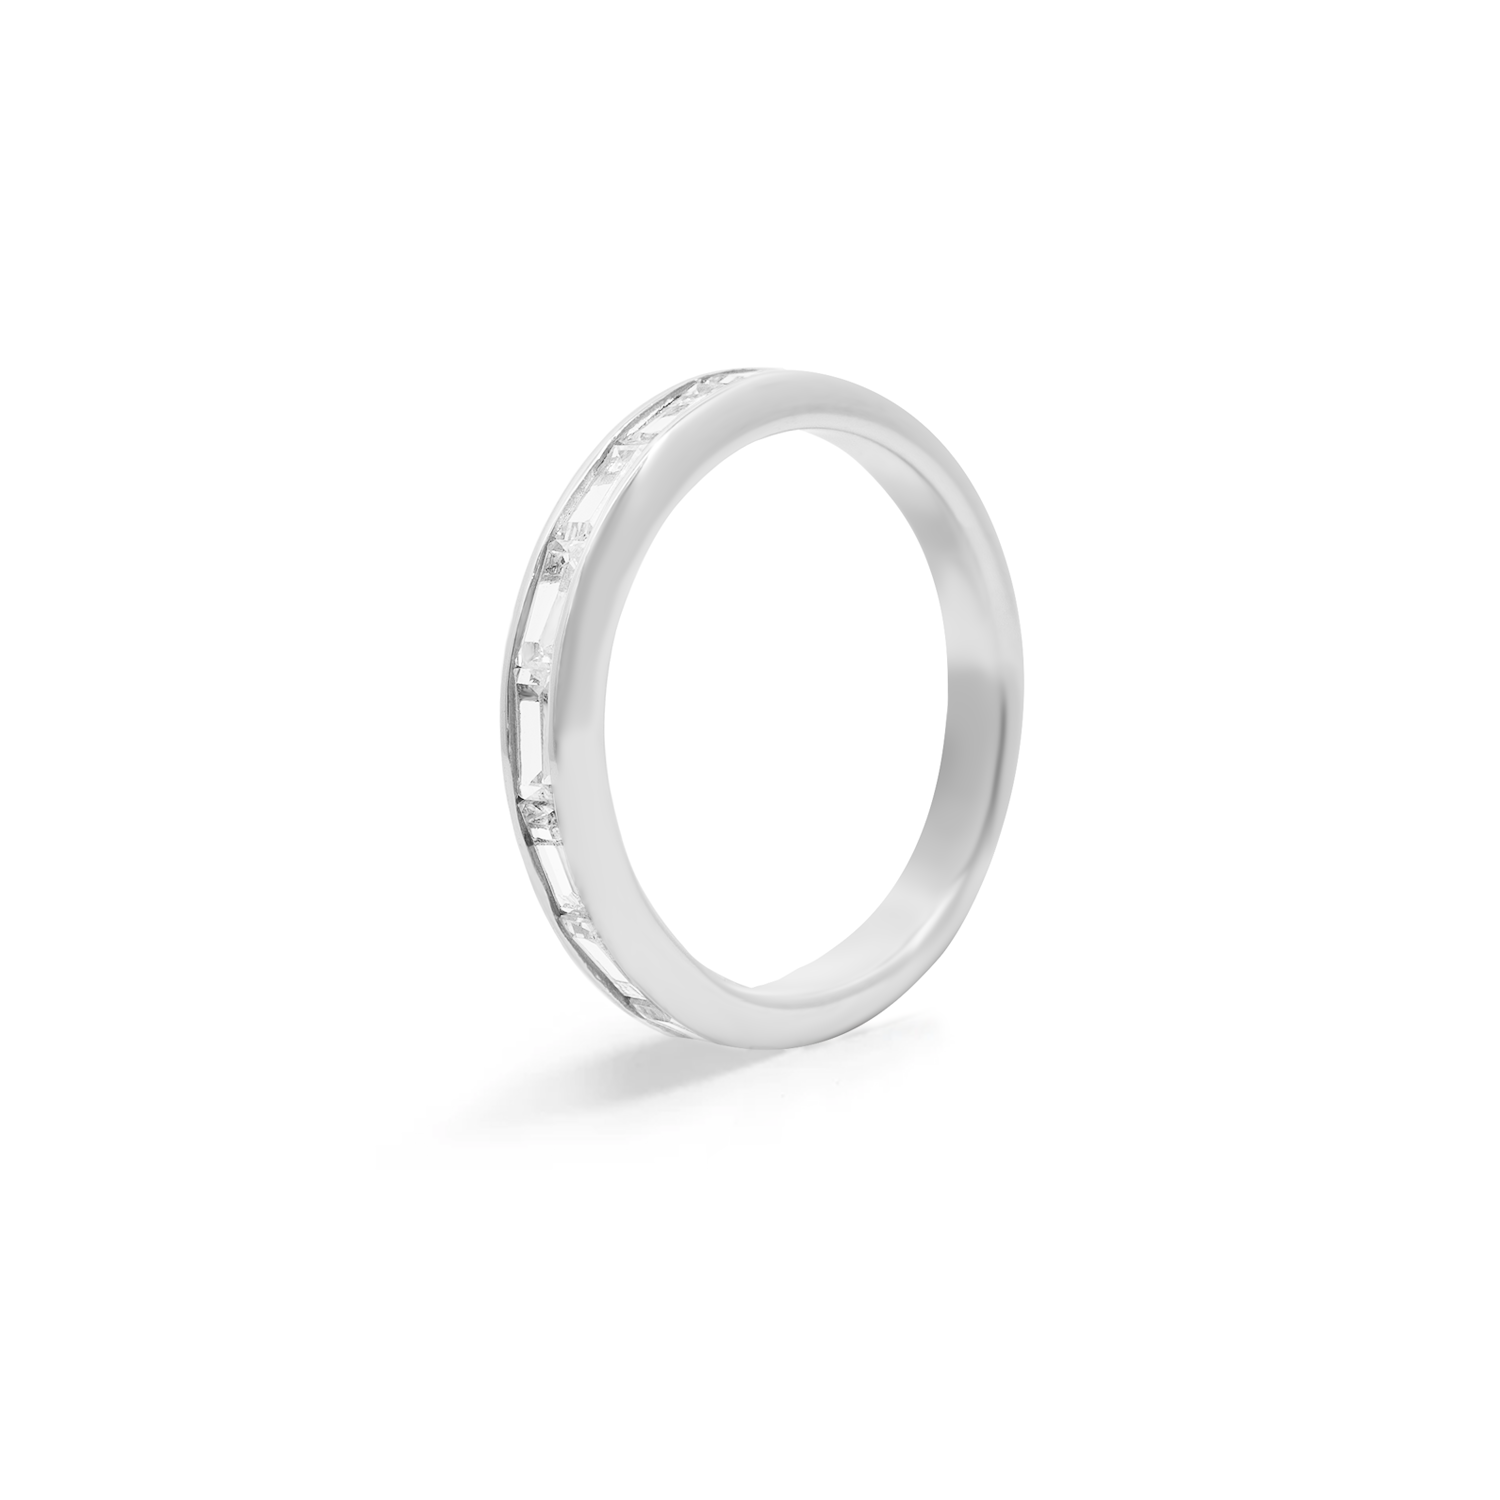 Minimalist and classic ring in silver with cubic zirconia